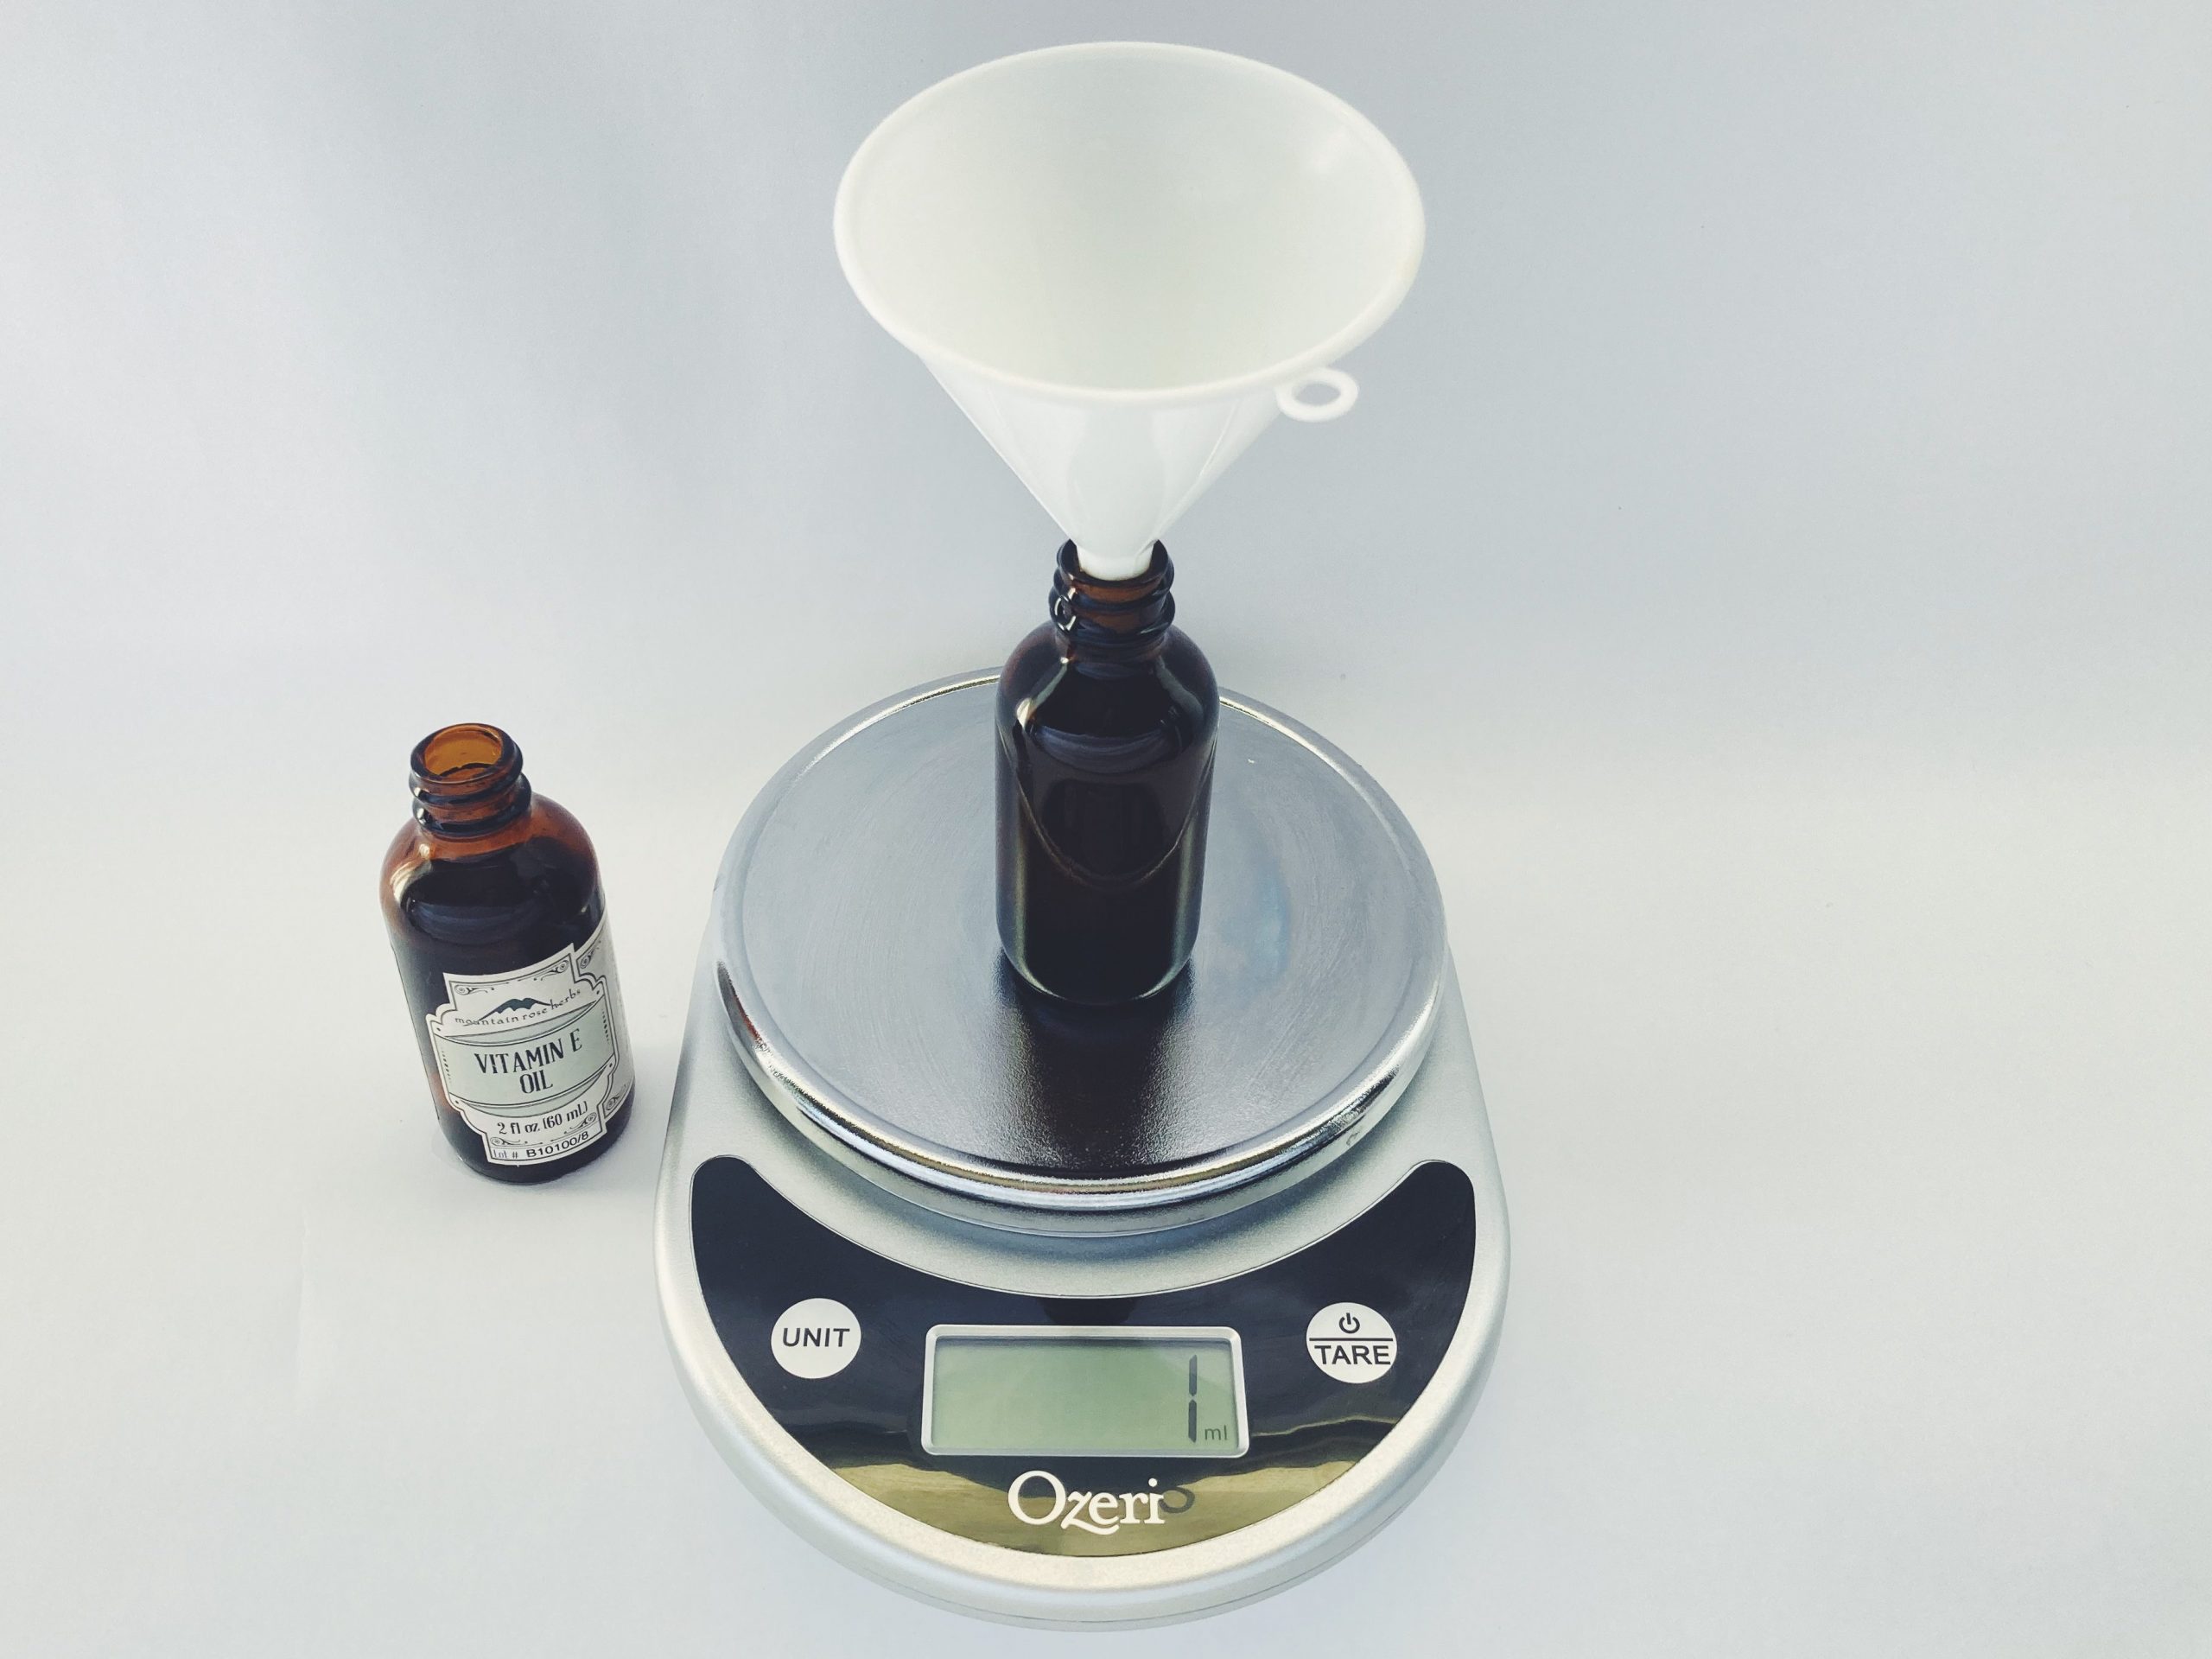 A funnel sitting in a glass jar for DIY cleansing oil on a kitchen scale. A glass bottle of Vitamin E oil sits next to the kitchen scale.